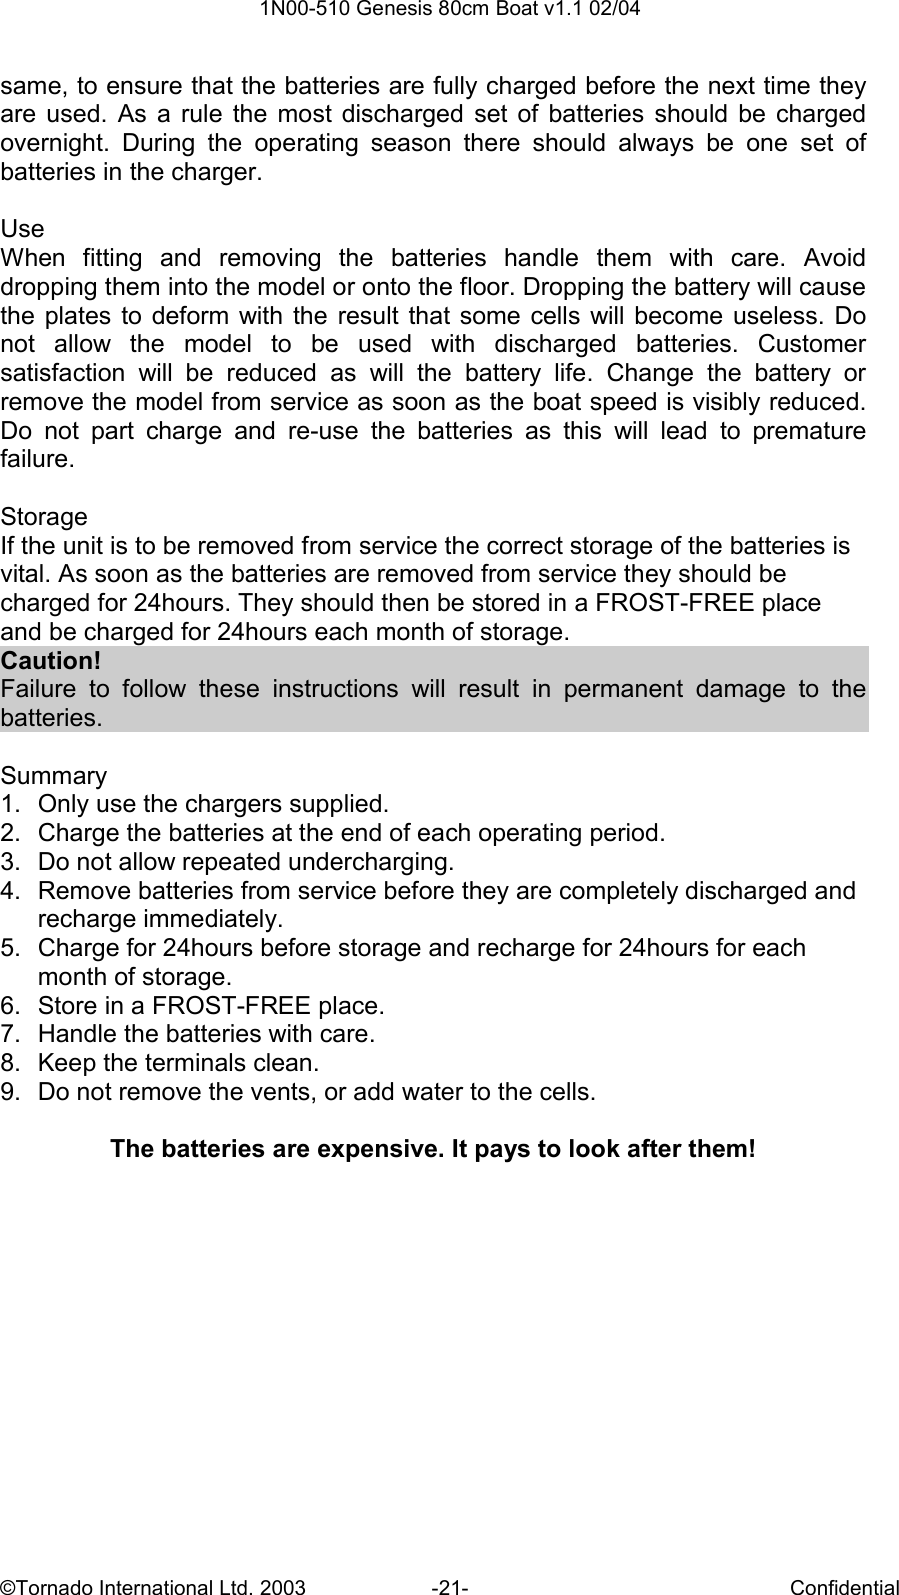  1N00-510 Genesis 80cm Boat v1.1 02/04 ©Tornado International Ltd. 2003  -21-  Confidential same, to ensure that the batteries are fully charged before the next time they are  used.  As  a  rule  the  most  discharged  set  of  batteries  should  be  charged overnight.  During  the  operating  season  there  should  always  be  one  set  of batteries in the charger.   Use When  fitting  and  removing  the  batteries  handle  them  with  care.  Avoid dropping them into the model or onto the floor. Dropping the battery will cause the plates to deform with  the  result  that  some cells will become  useless.  Do not  allow  the  model  to  be  used  with  discharged  batteries.  Customer satisfaction  will  be  reduced  as  will  the  battery  life.  Change  the  battery  or remove the model from service as soon as the boat speed is visibly reduced. Do  not  part  charge  and  re-use  the  batteries  as  this  will  lead  to  premature failure.  Storage If the unit is to be removed from service the correct storage of the batteries is vital. As soon as the batteries are removed from service they should be charged for 24hours. They should then be stored in a FROST-FREE place and be charged for 24hours each month of storage.  Caution! Failure  to  follow  these  instructions  will  result  in  permanent  damage  to  the batteries.  Summary 1.  Only use the chargers supplied. 2.  Charge the batteries at the end of each operating period. 3.  Do not allow repeated undercharging. 4.  Remove batteries from service before they are completely discharged and recharge immediately. 5.  Charge for 24hours before storage and recharge for 24hours for each month of storage. 6.  Store in a FROST-FREE place. 7.  Handle the batteries with care. 8.  Keep the terminals clean. 9.  Do not remove the vents, or add water to the cells.  The batteries are expensive. It pays to look after them! 